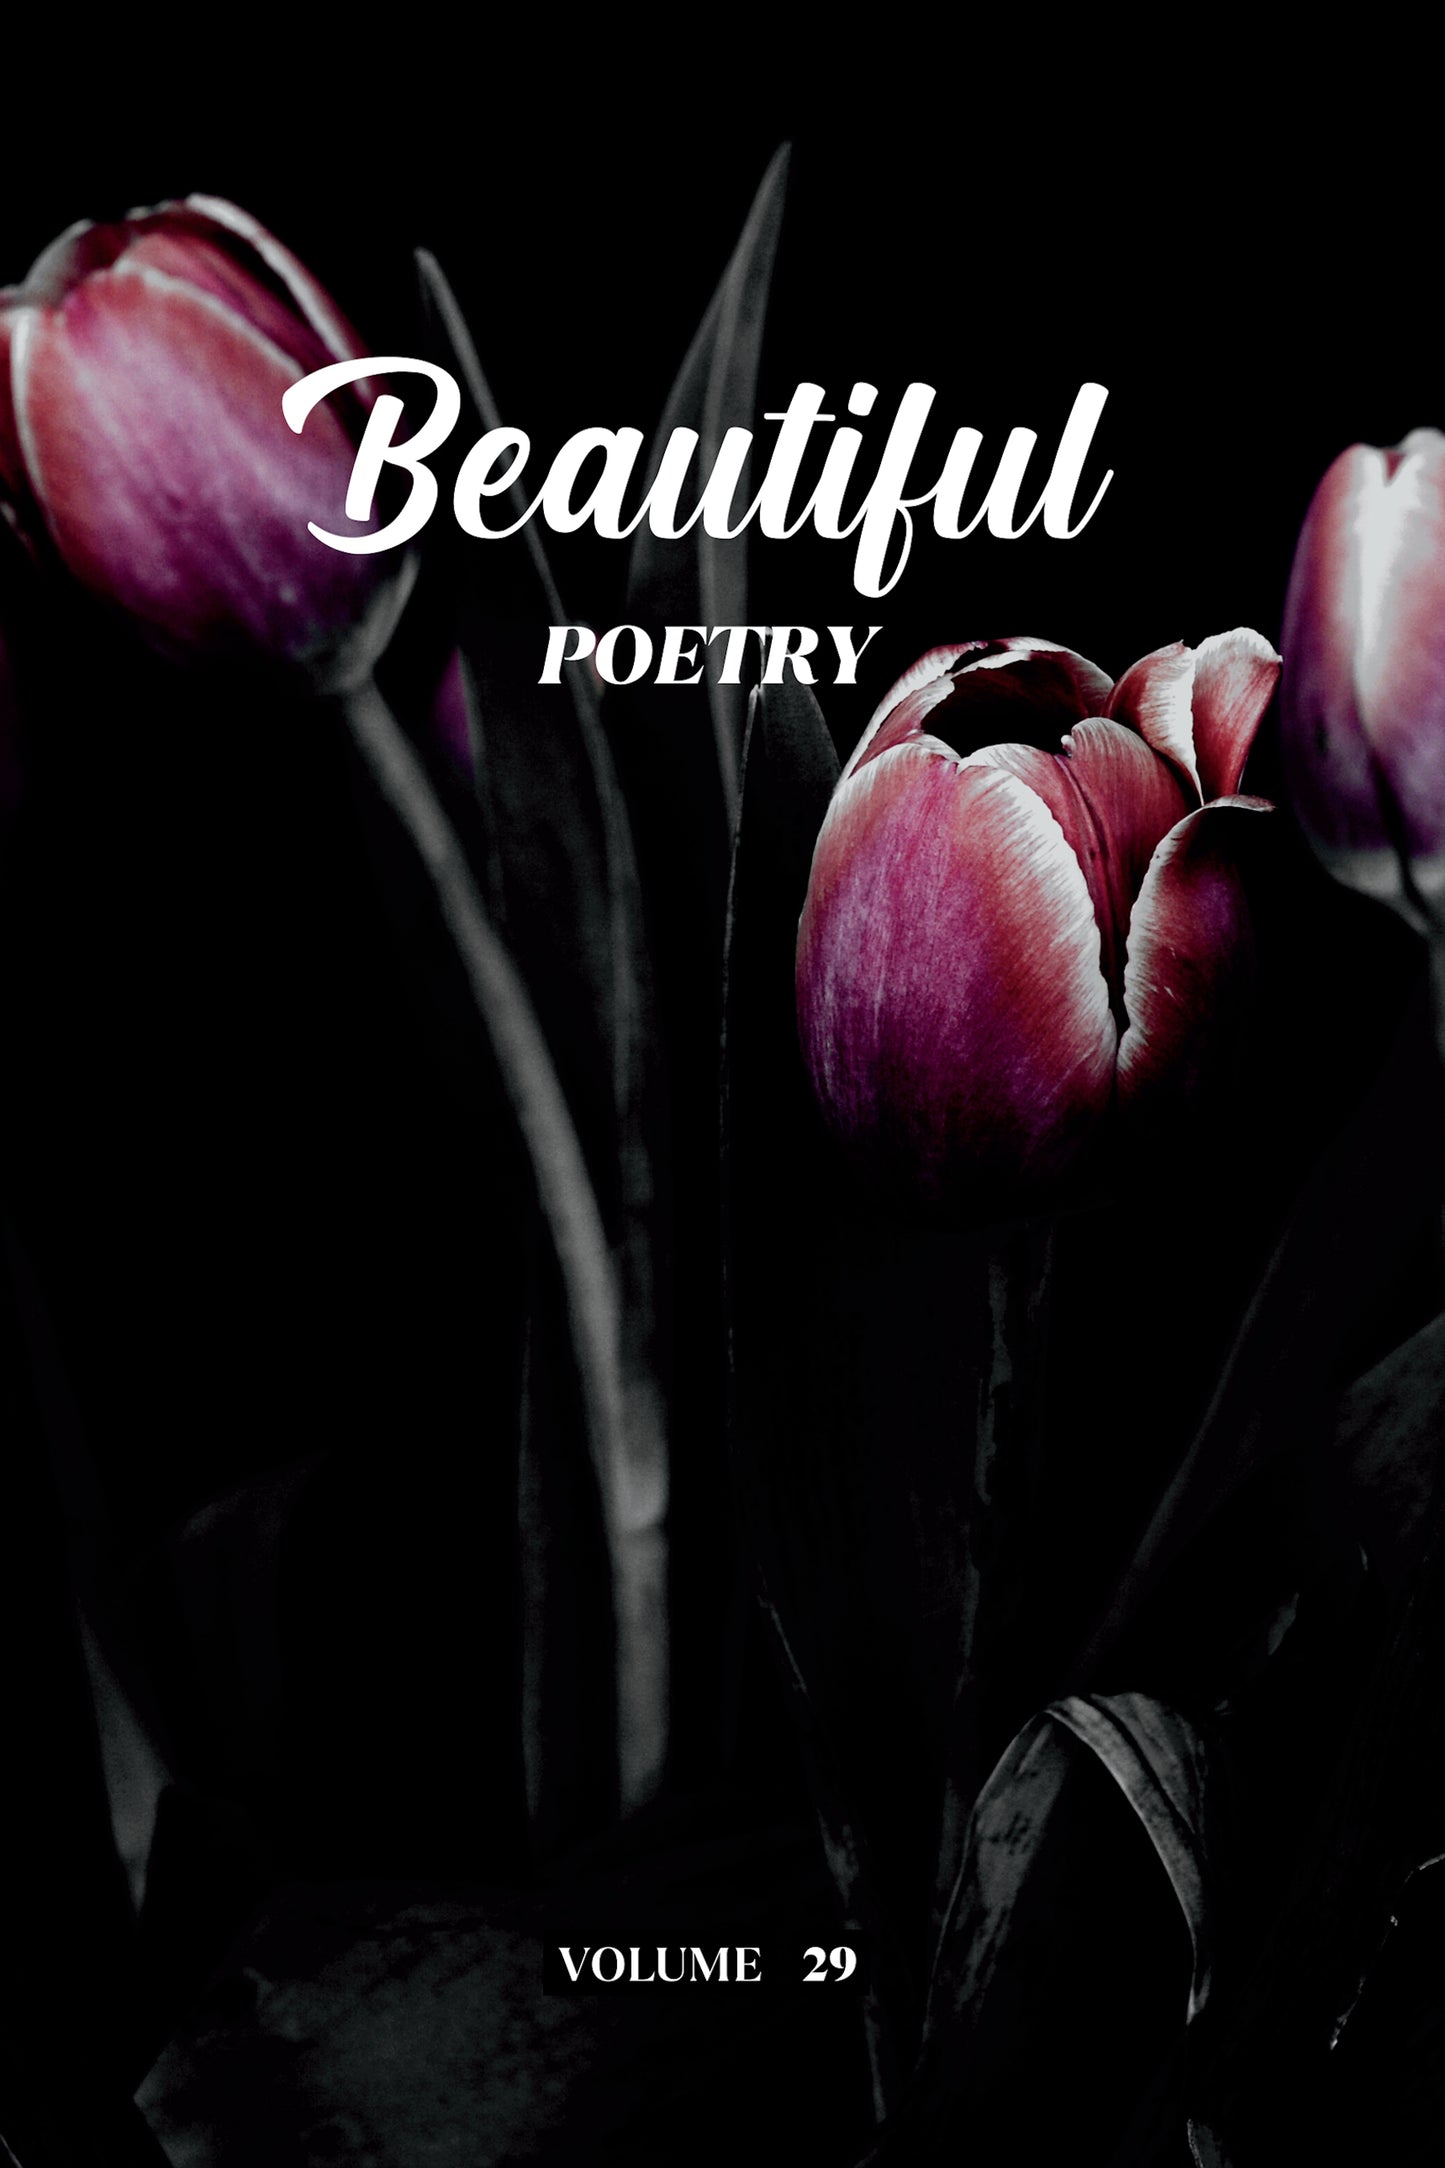 Beautiful Poetry (Volume 29) - Physical Book (Pre-Order)